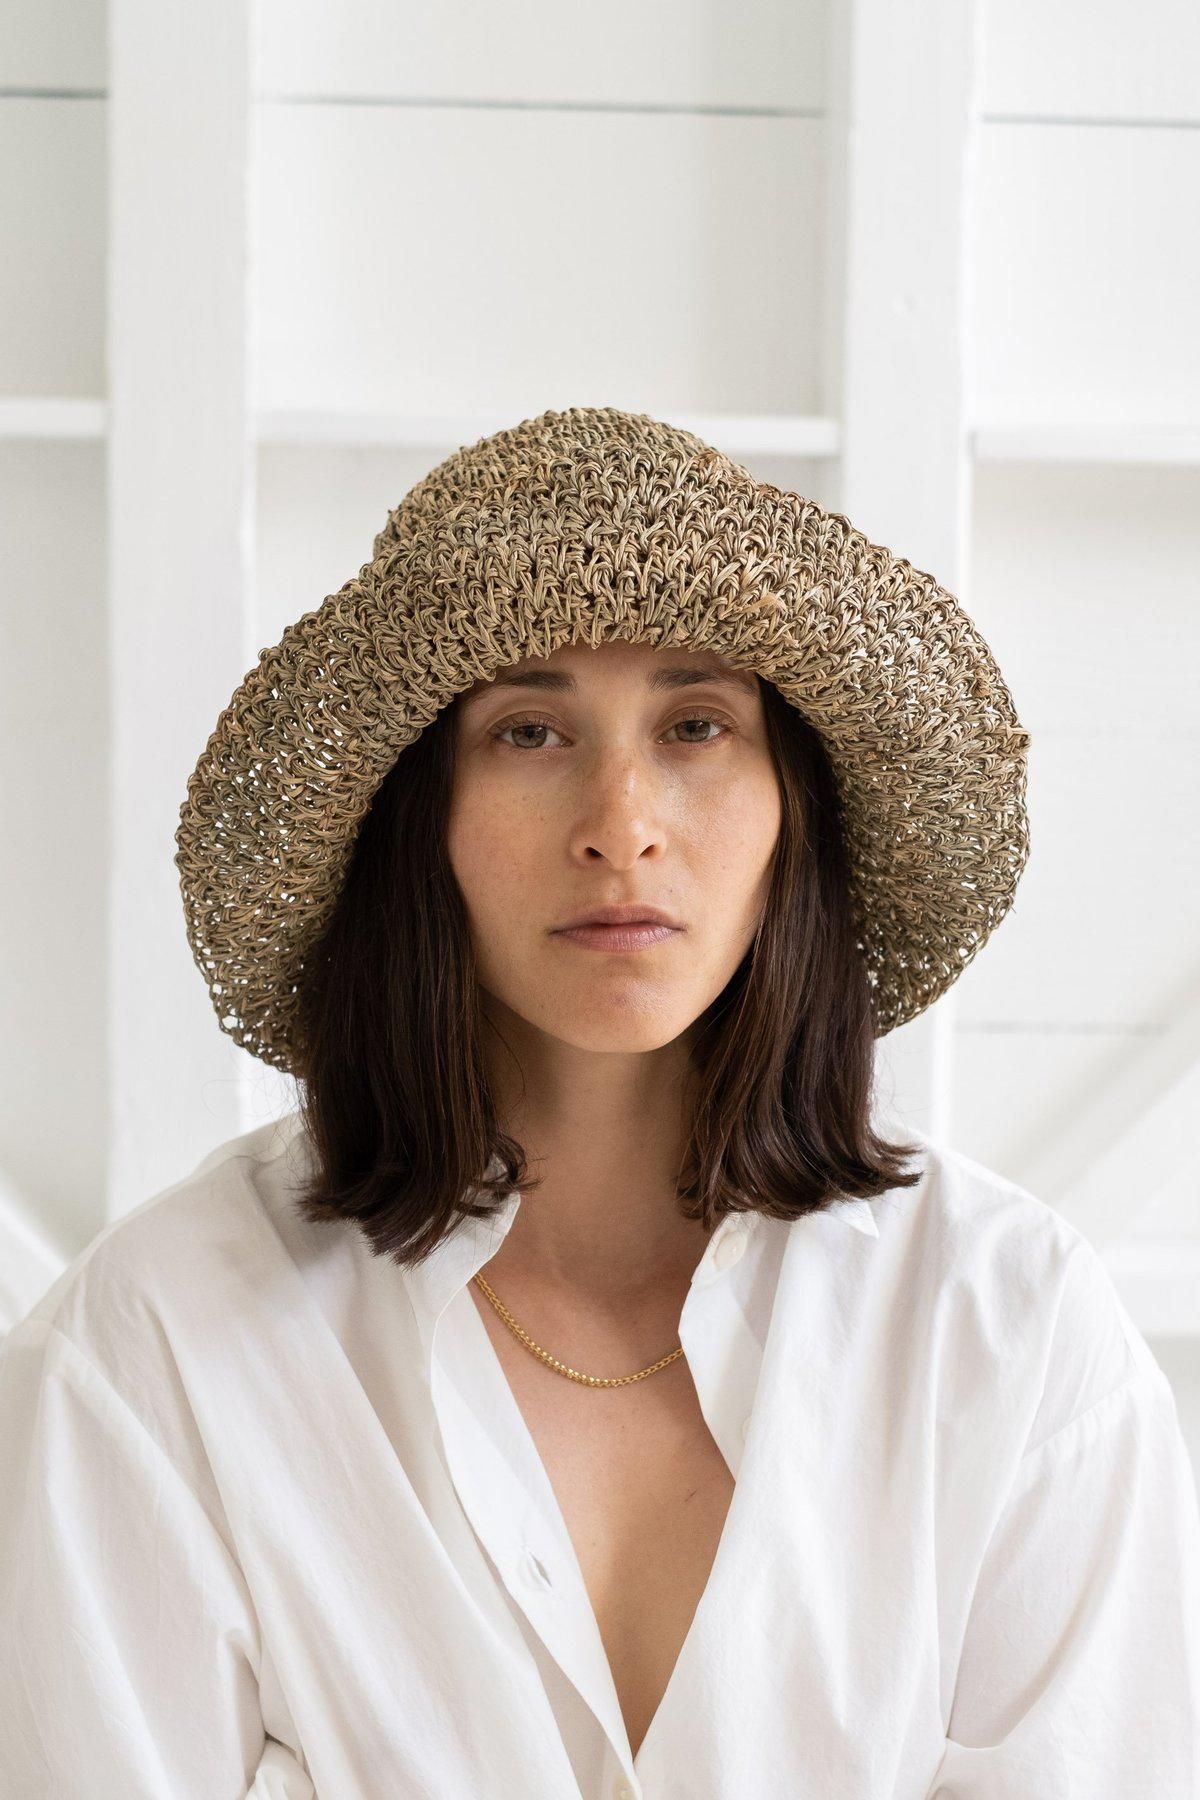 Opia Hat in Seagrass